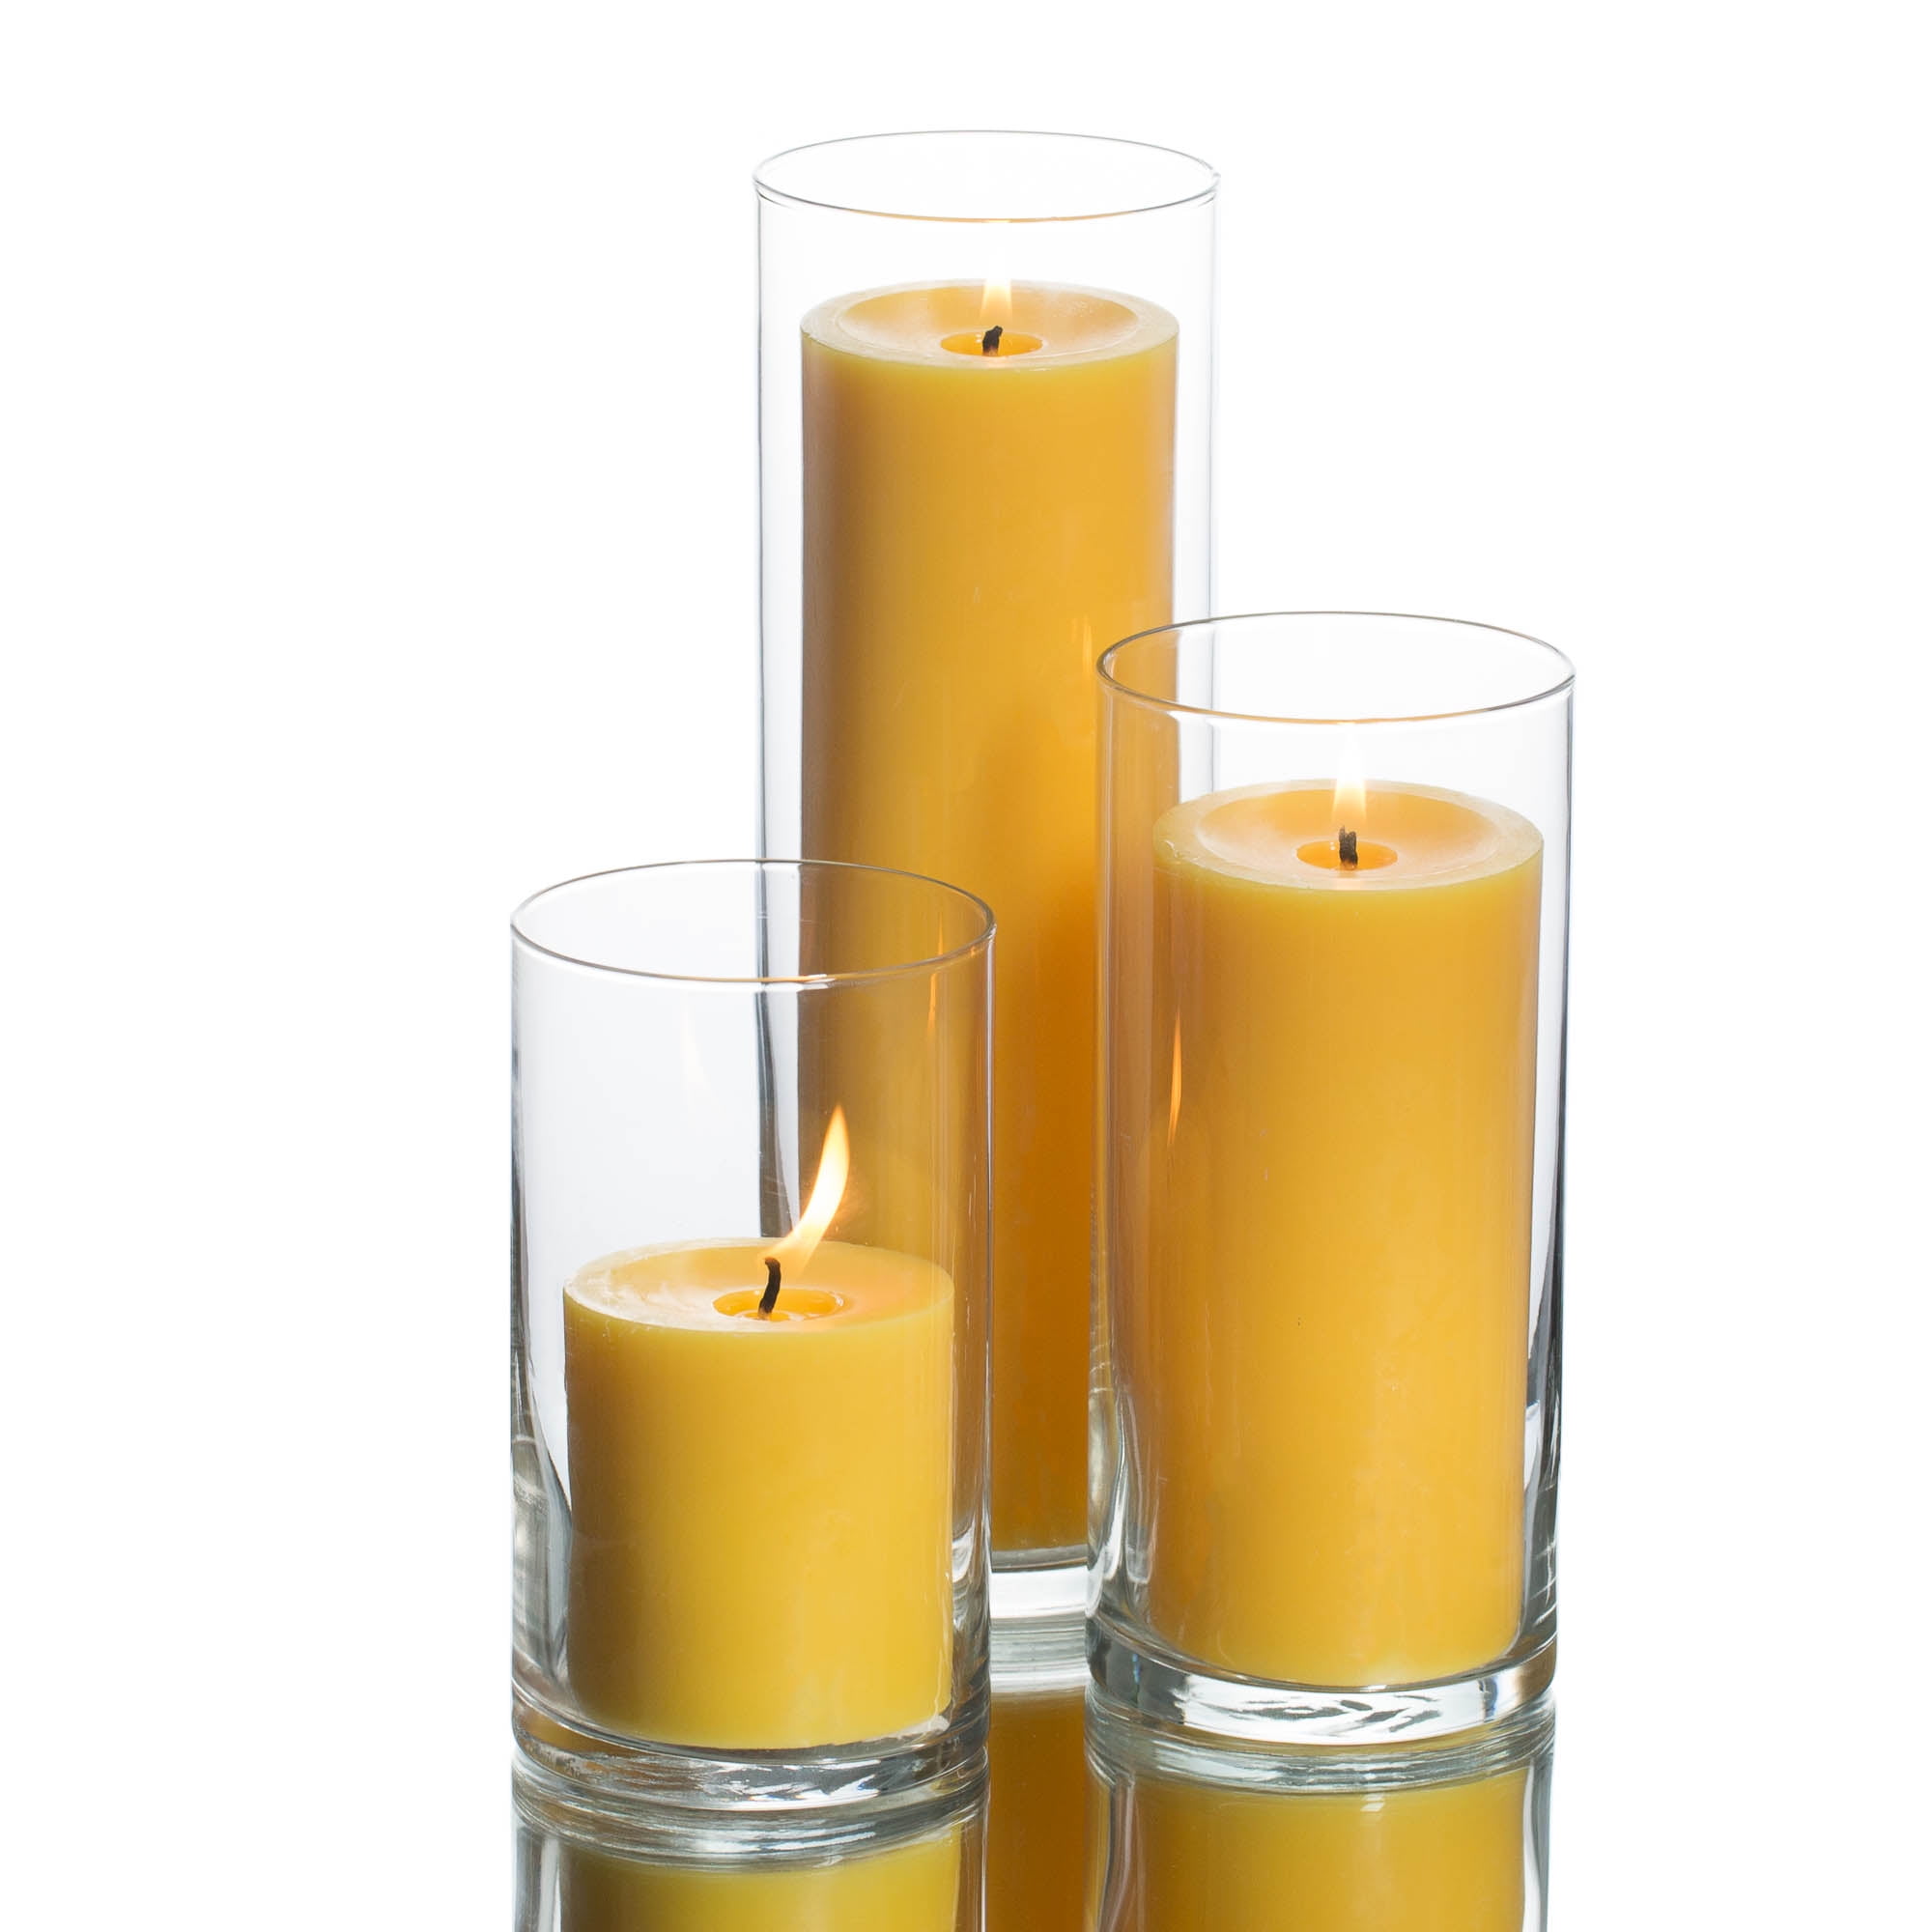 7 DAY UNSCENTED CANDLE IN GLASS YELLOW 